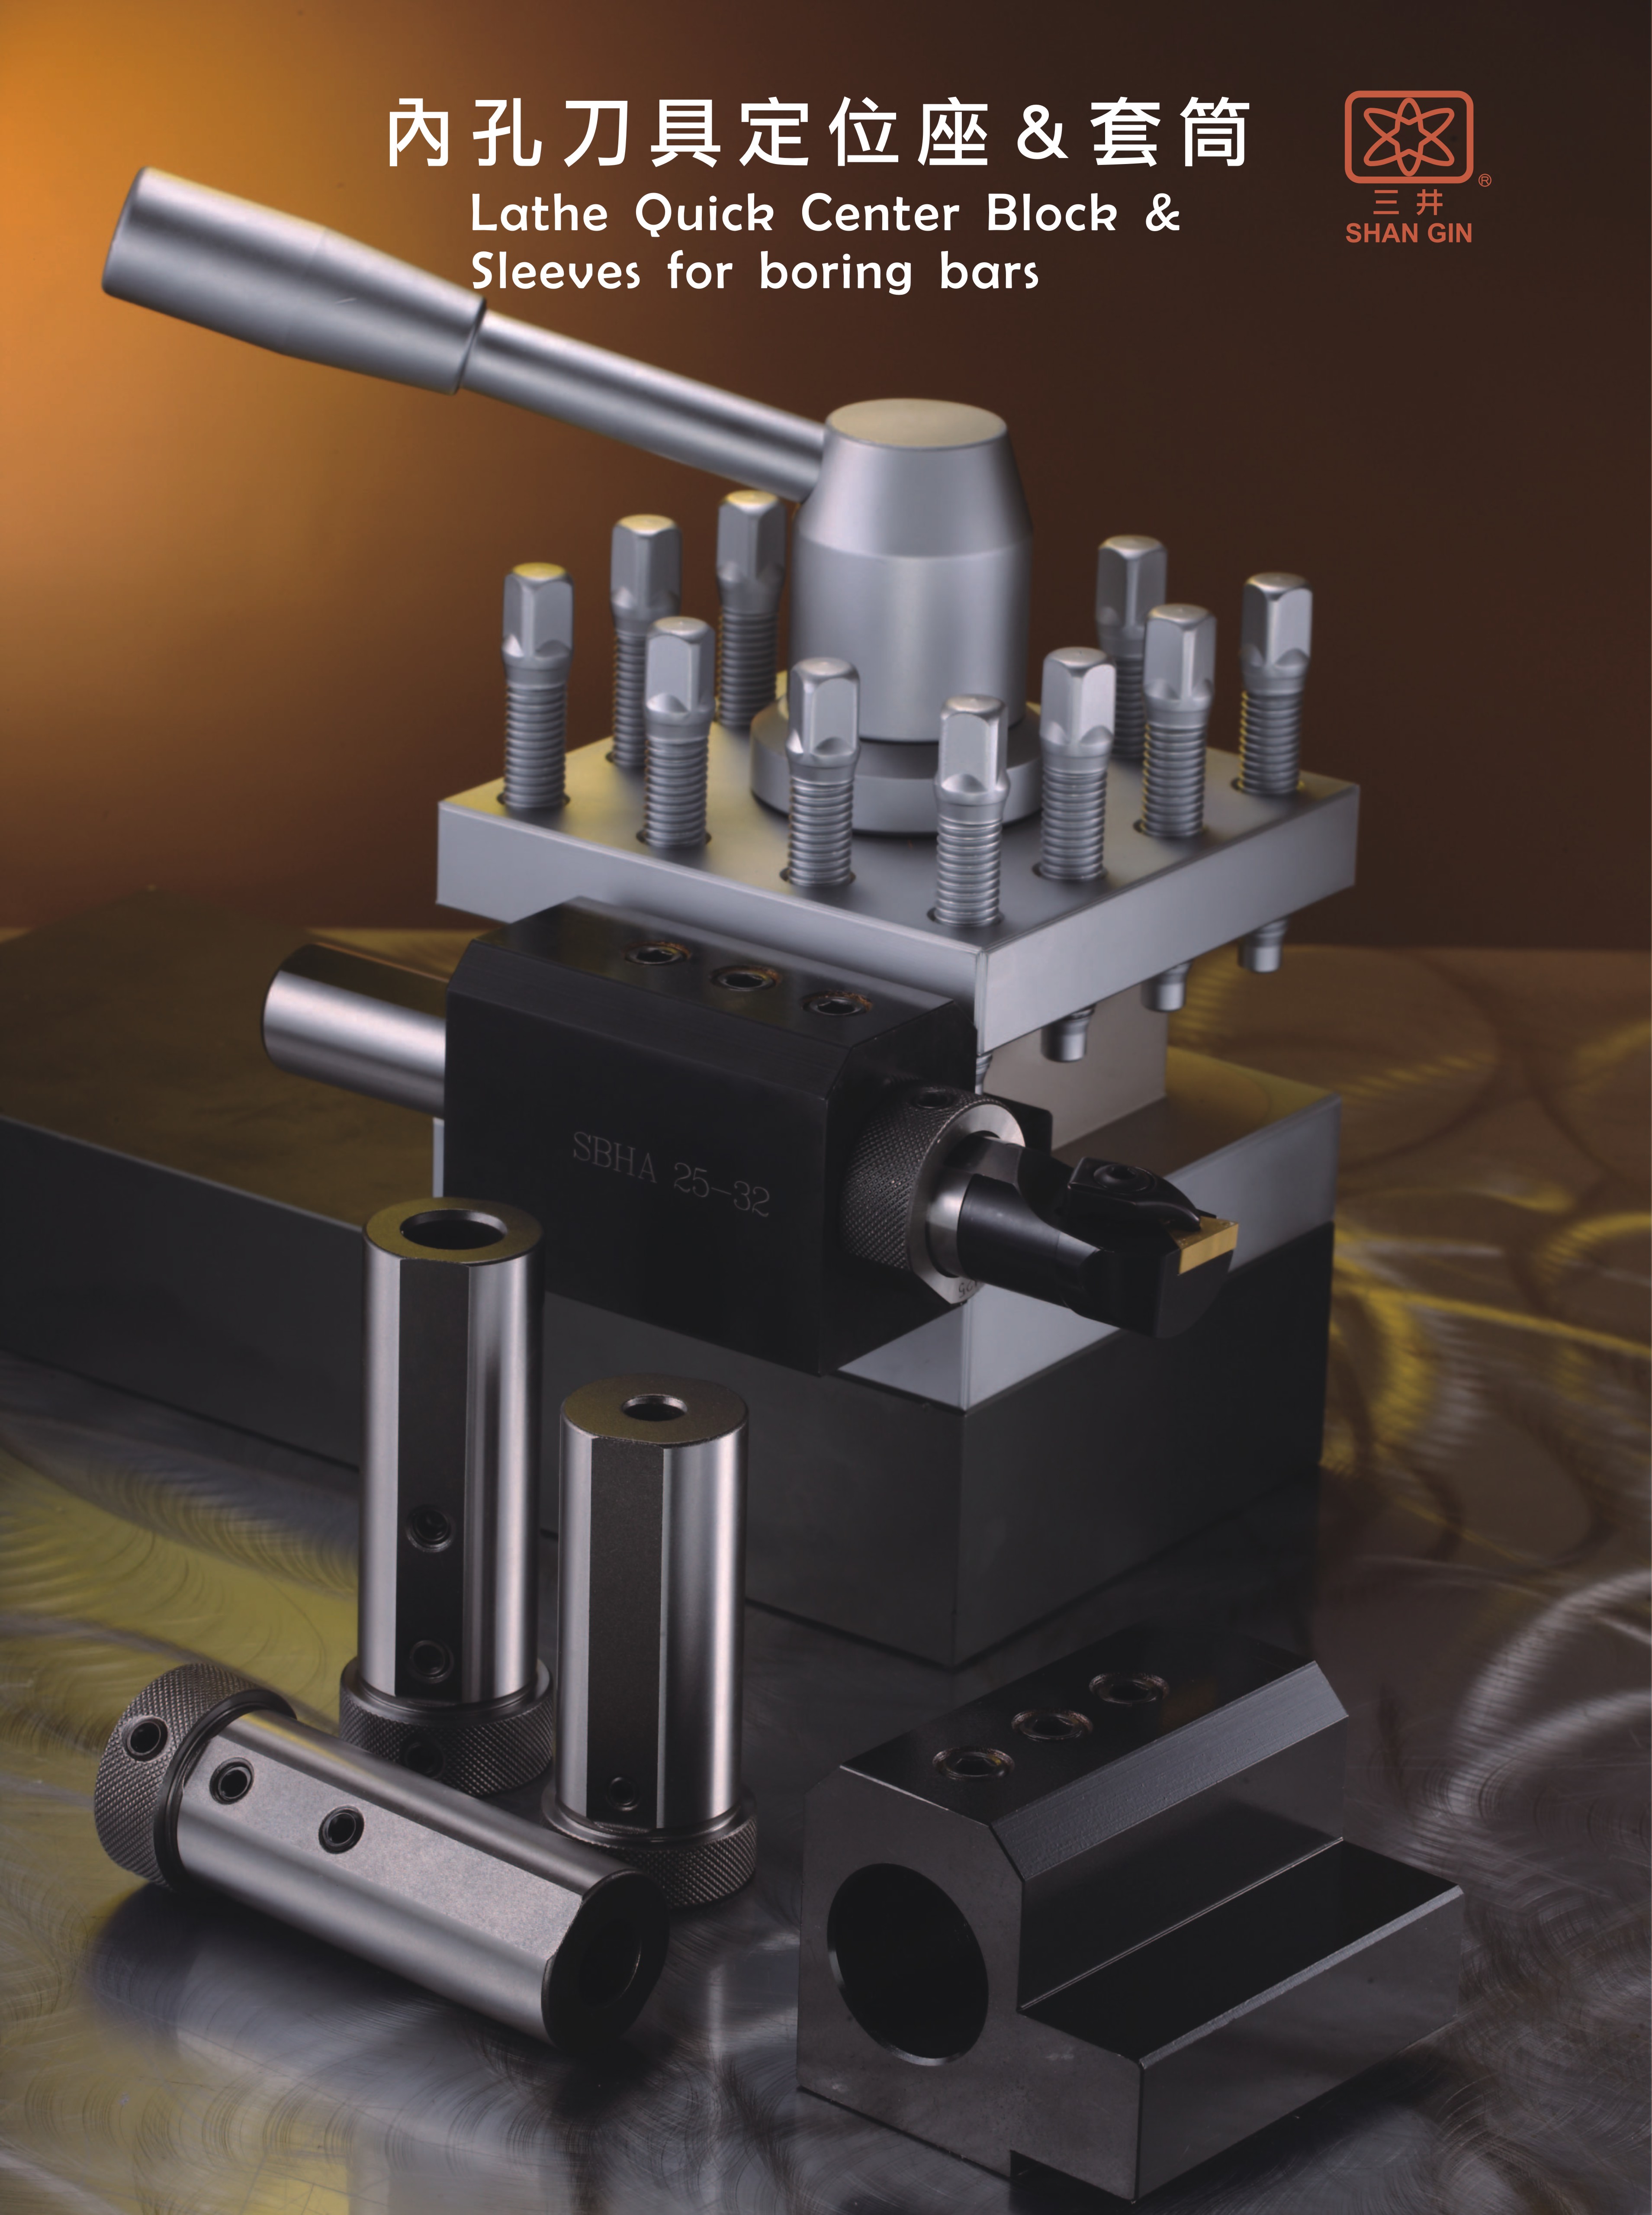 Products|Lathe Quick Center Block & Sleeves for Boring Bars